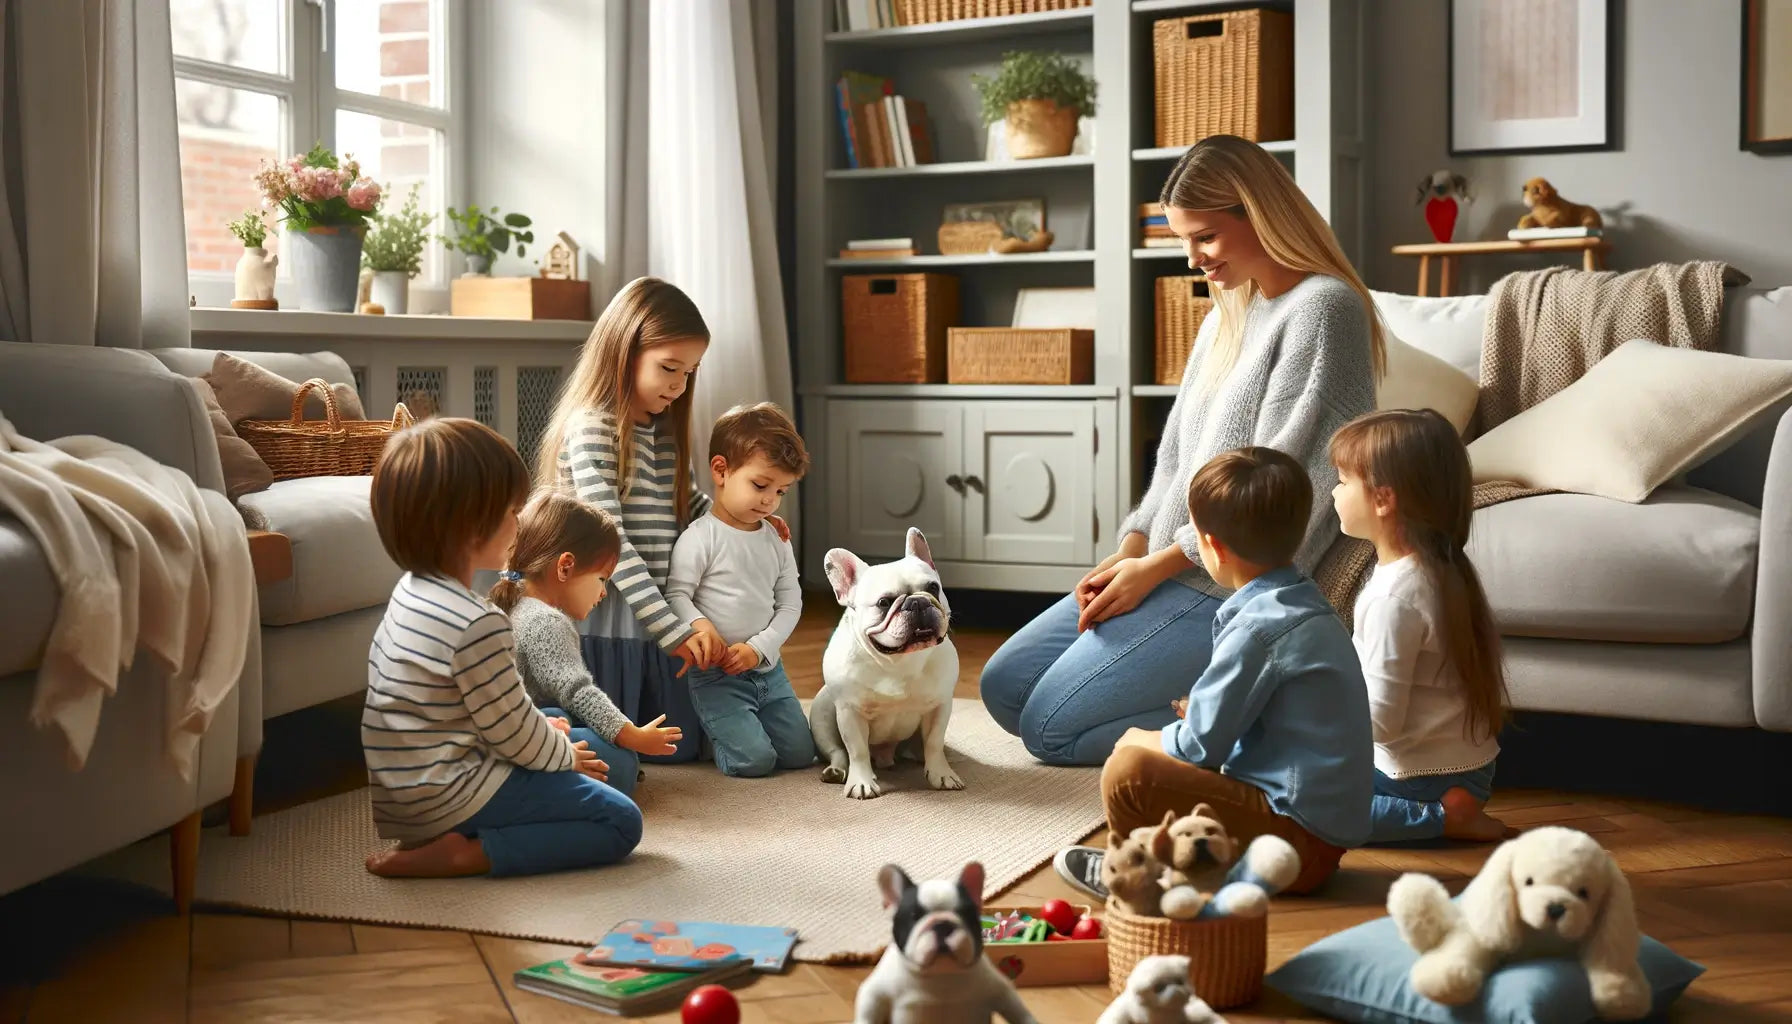 White French Bulldog in a family environment, interacting gently with children and adults in a cozy living room.